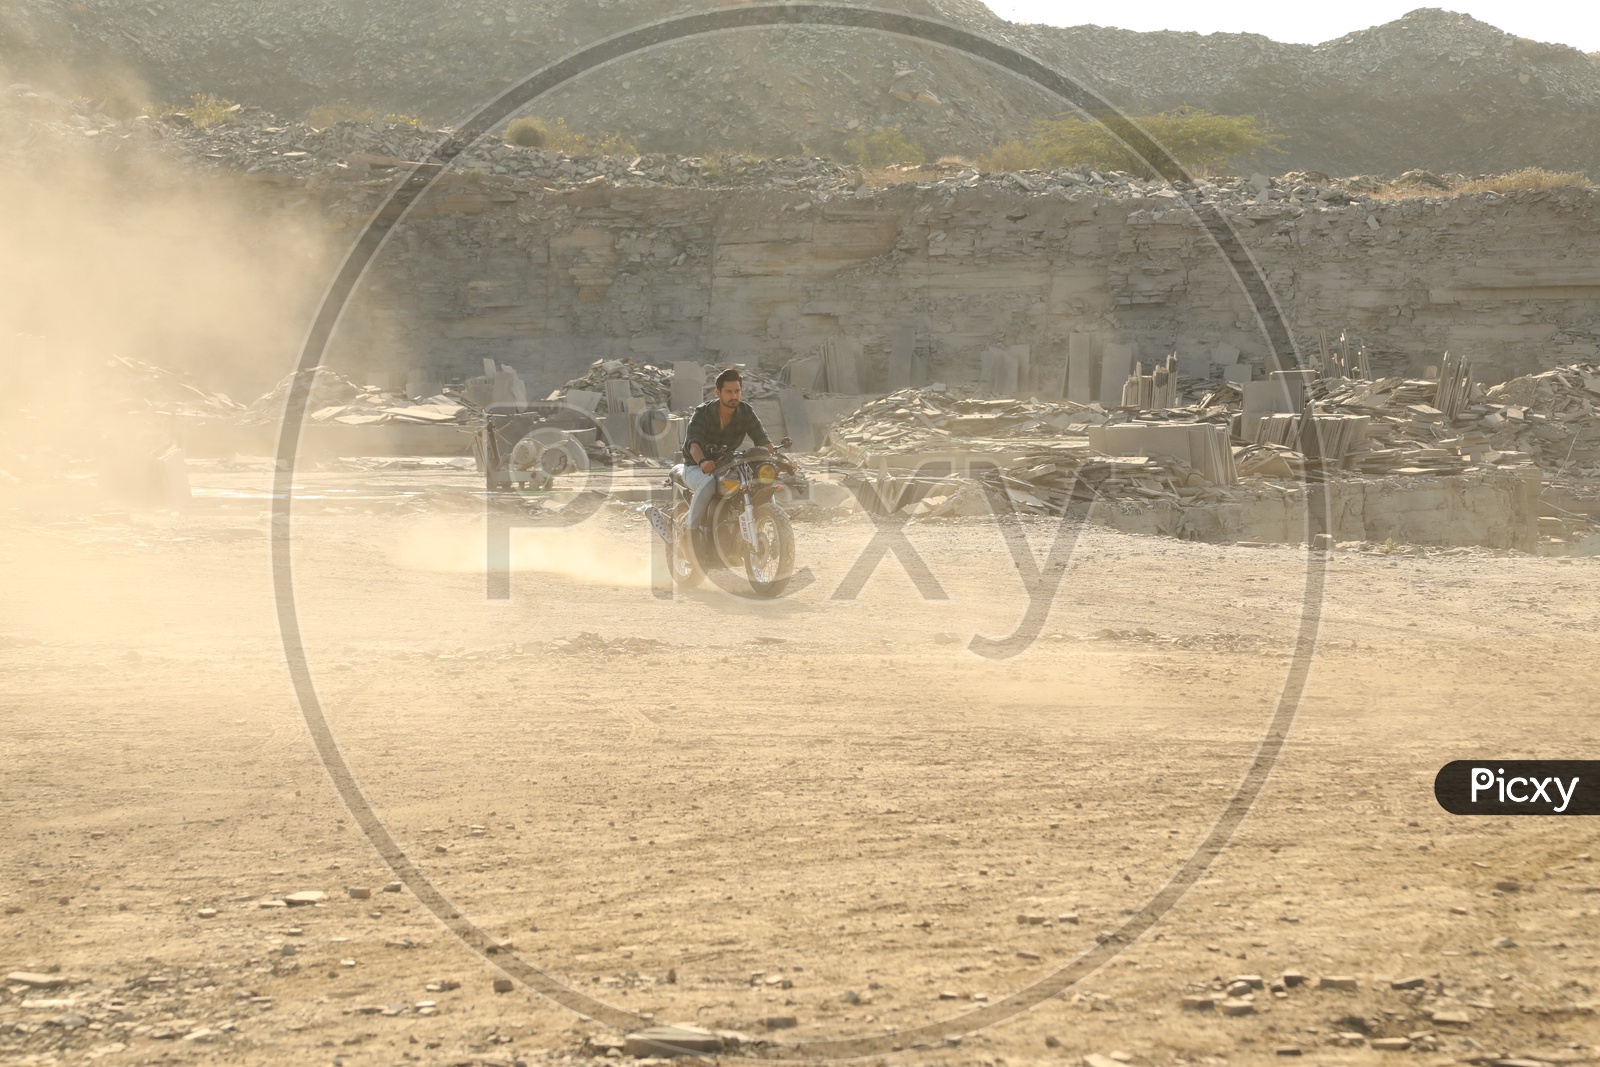 A man on the bike at Black stone mining area